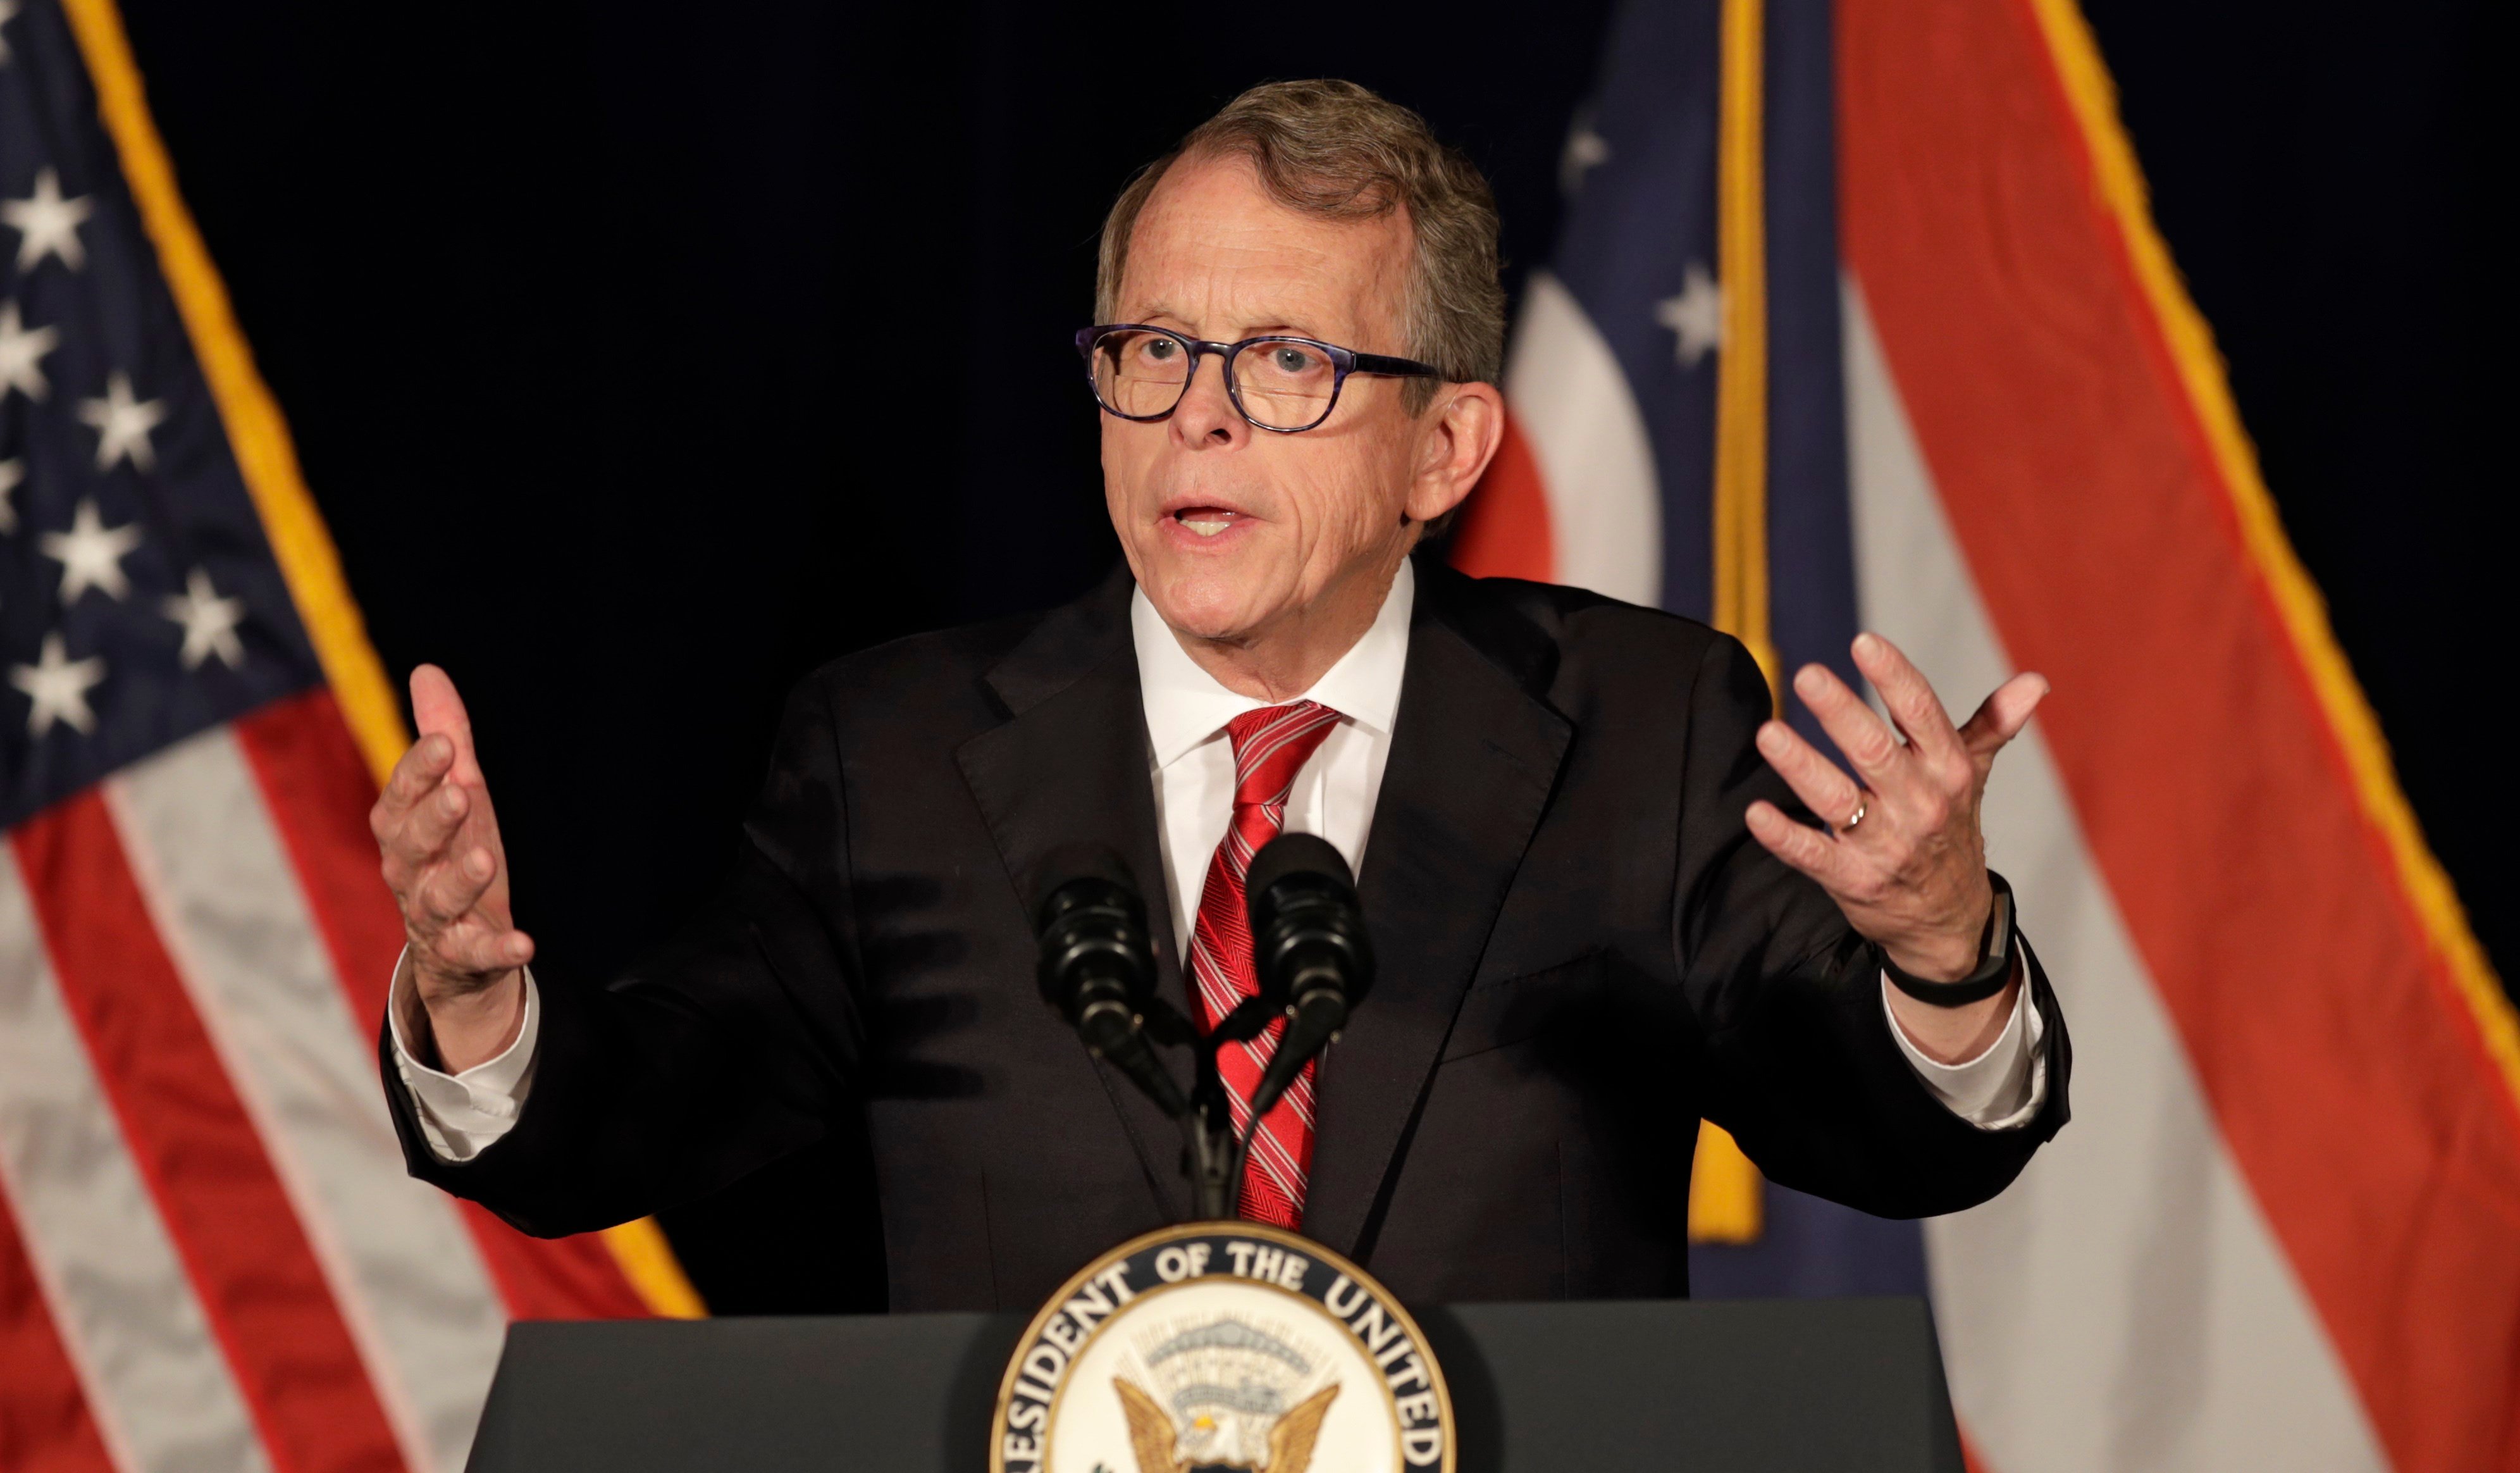 Ohio governor to deliver State of the State on March 31